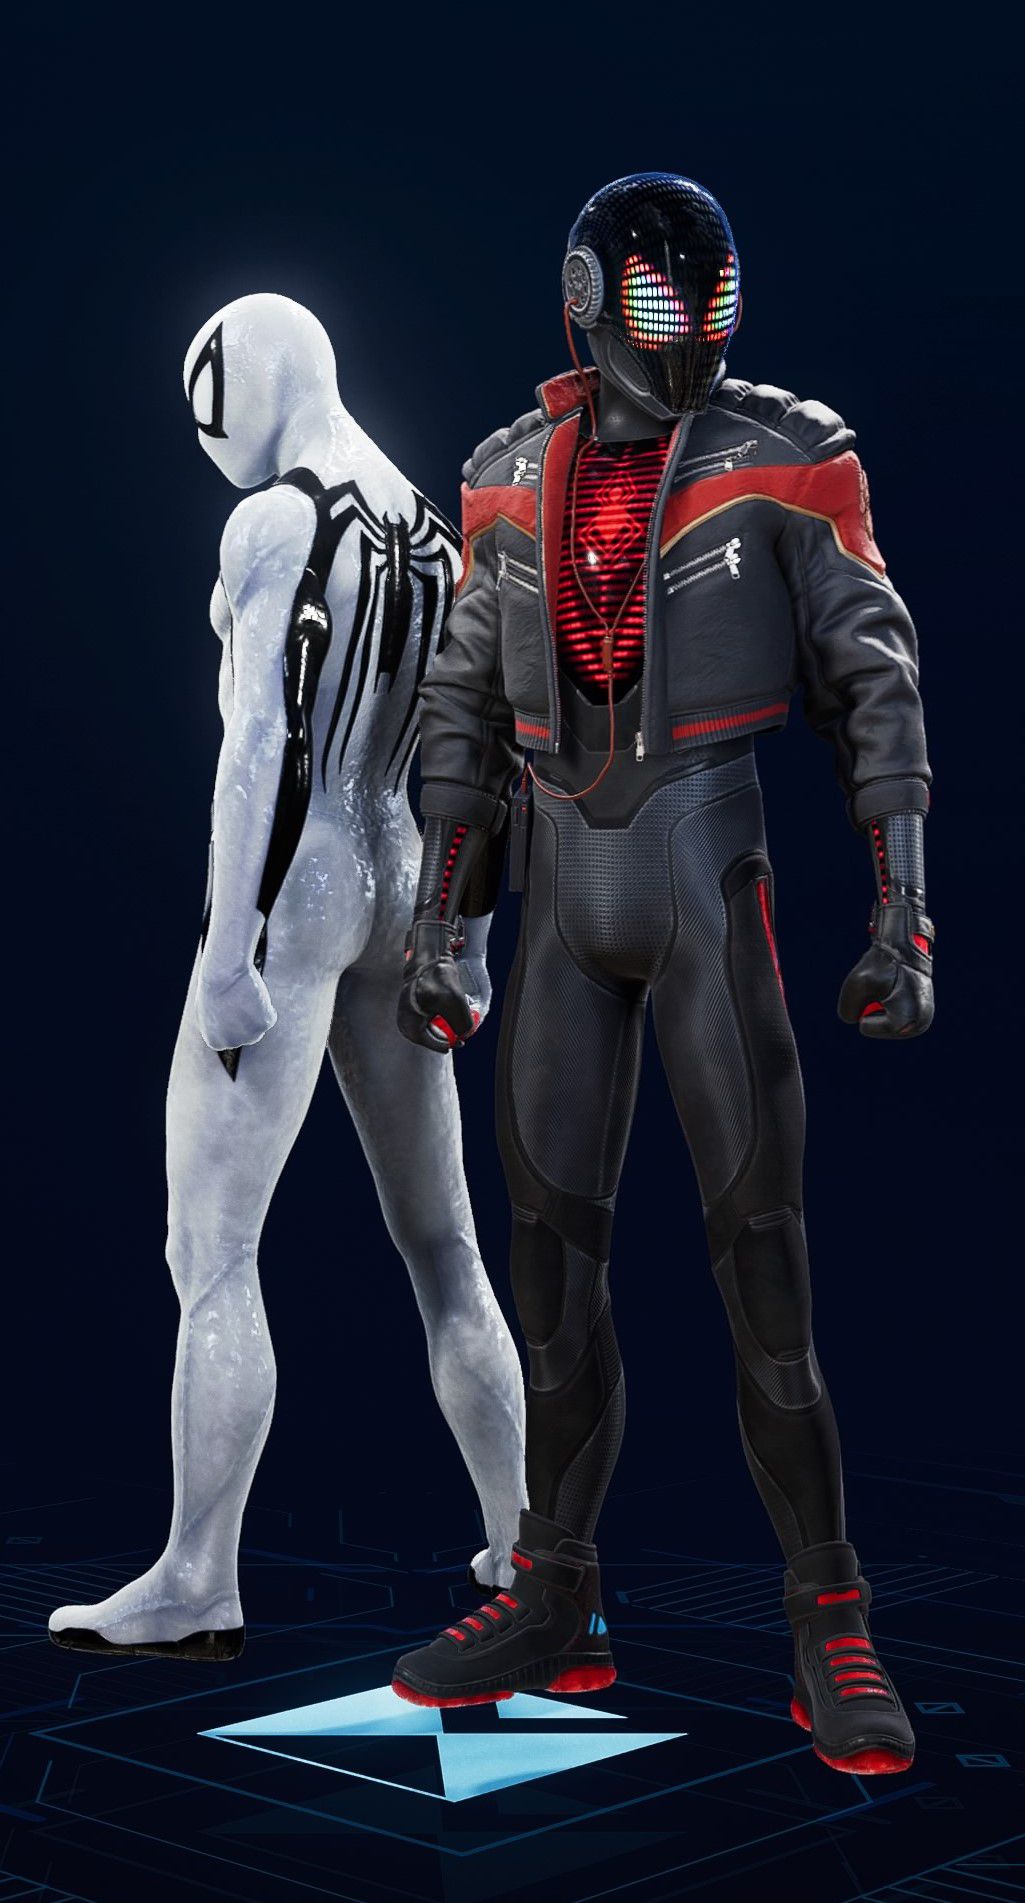 Miles Morales stands in his Miles Morales 2020 Suit in the suit selection screen of Spider-Man 2.